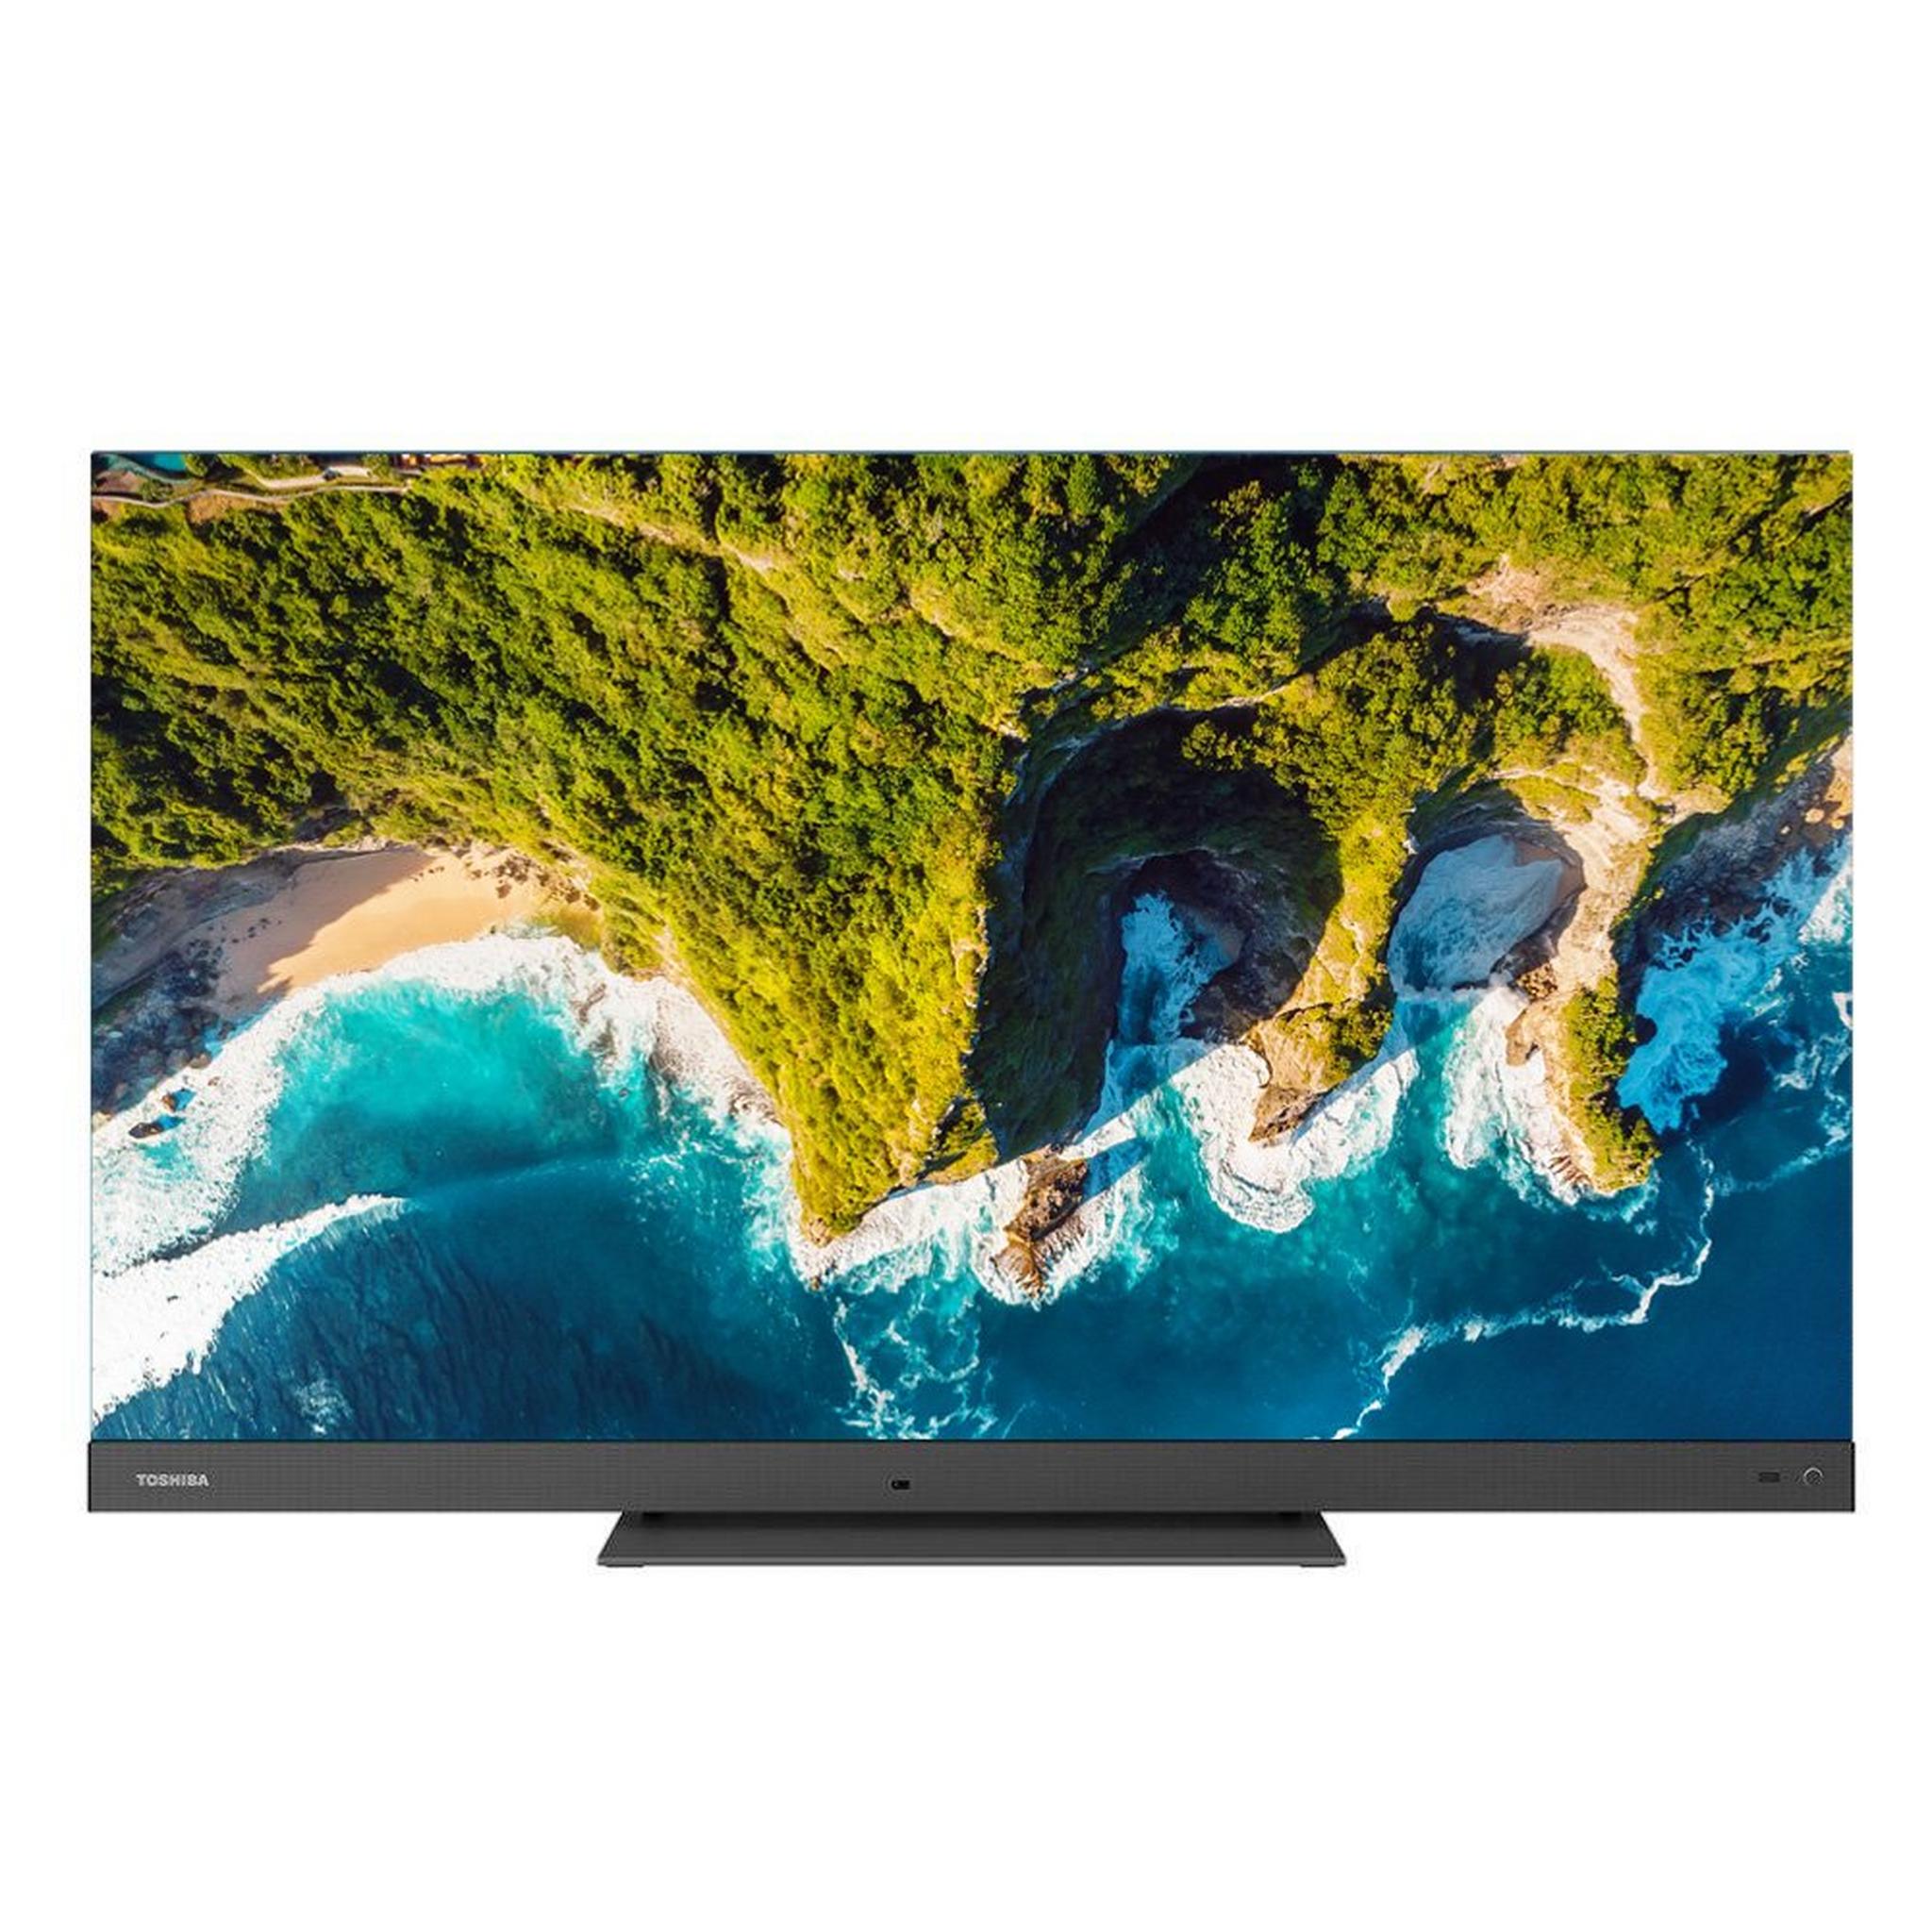 Toshiba 55-inch Android UHD QLED TV (55Z770)